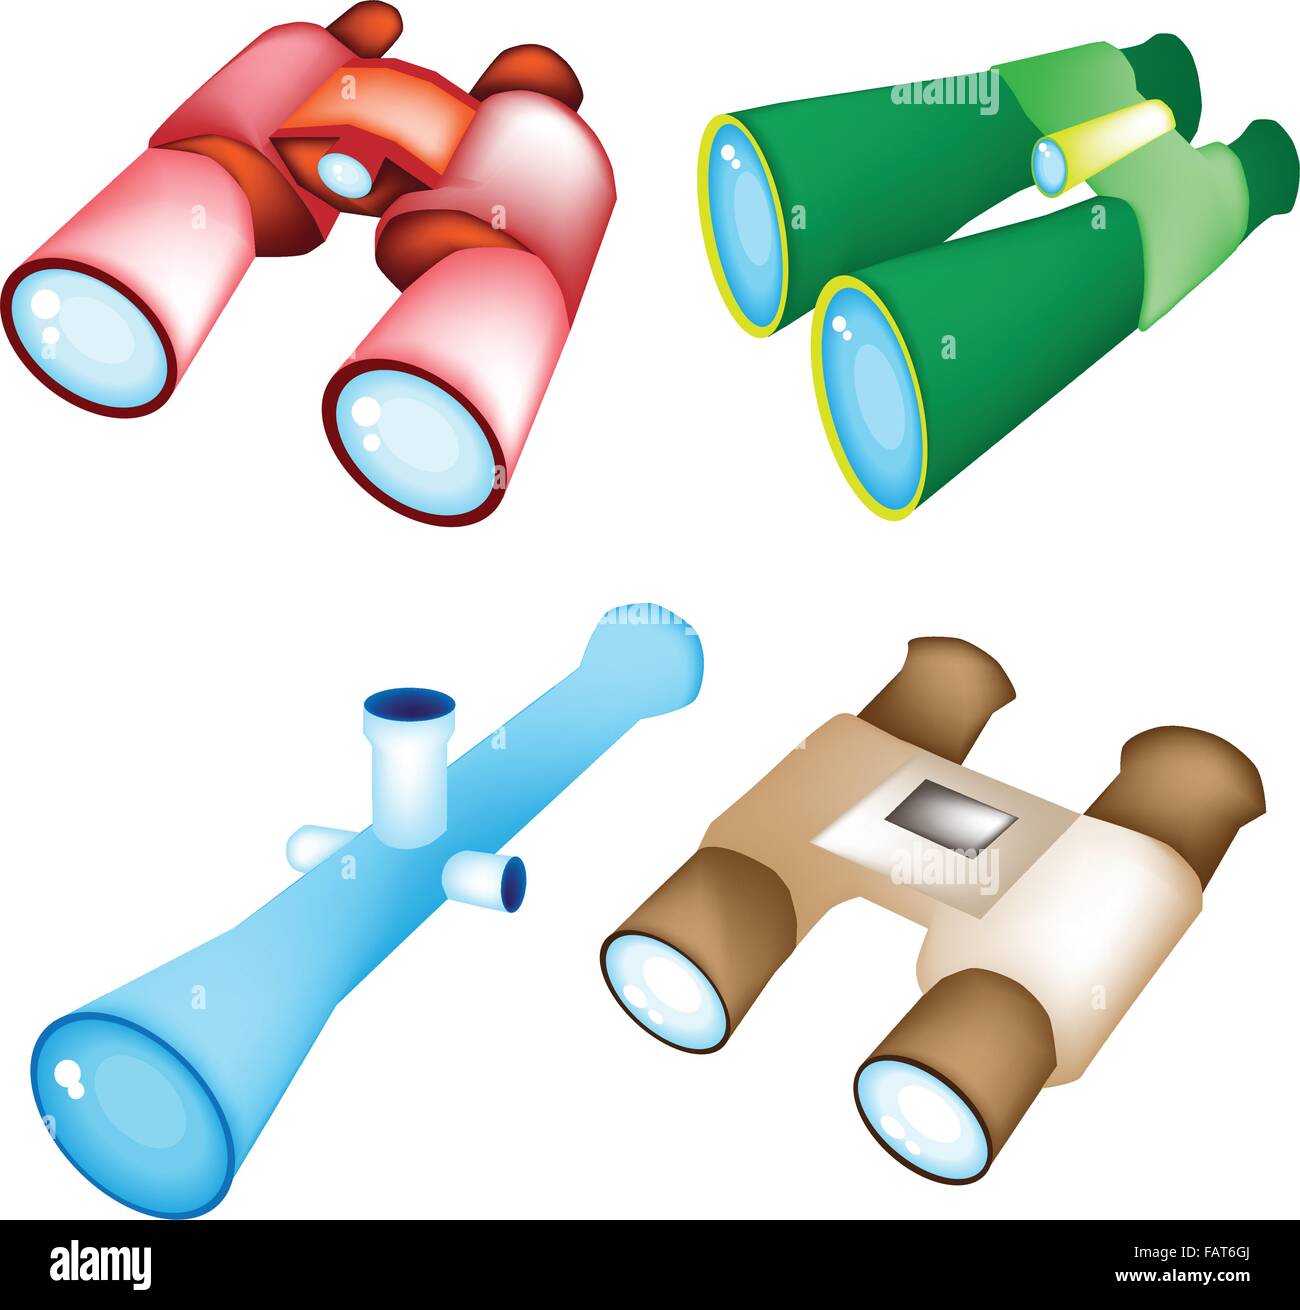 Optical instruments, Red, Green, Blue, and Brown Color of Binoculars Isolated on White Background Stock Vector